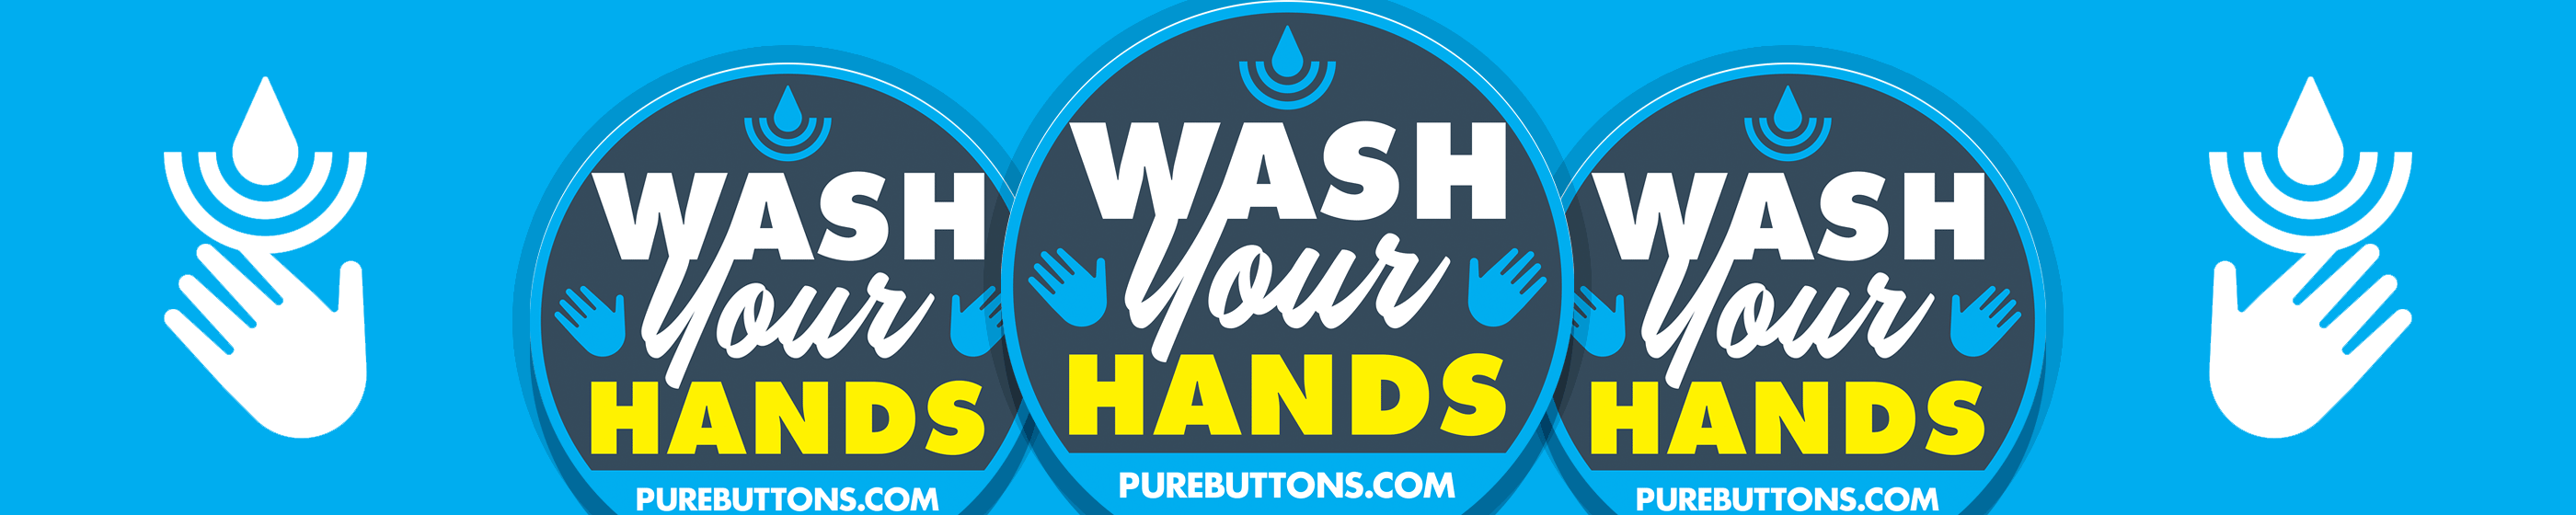 Wash Your Hands Button Cover Image